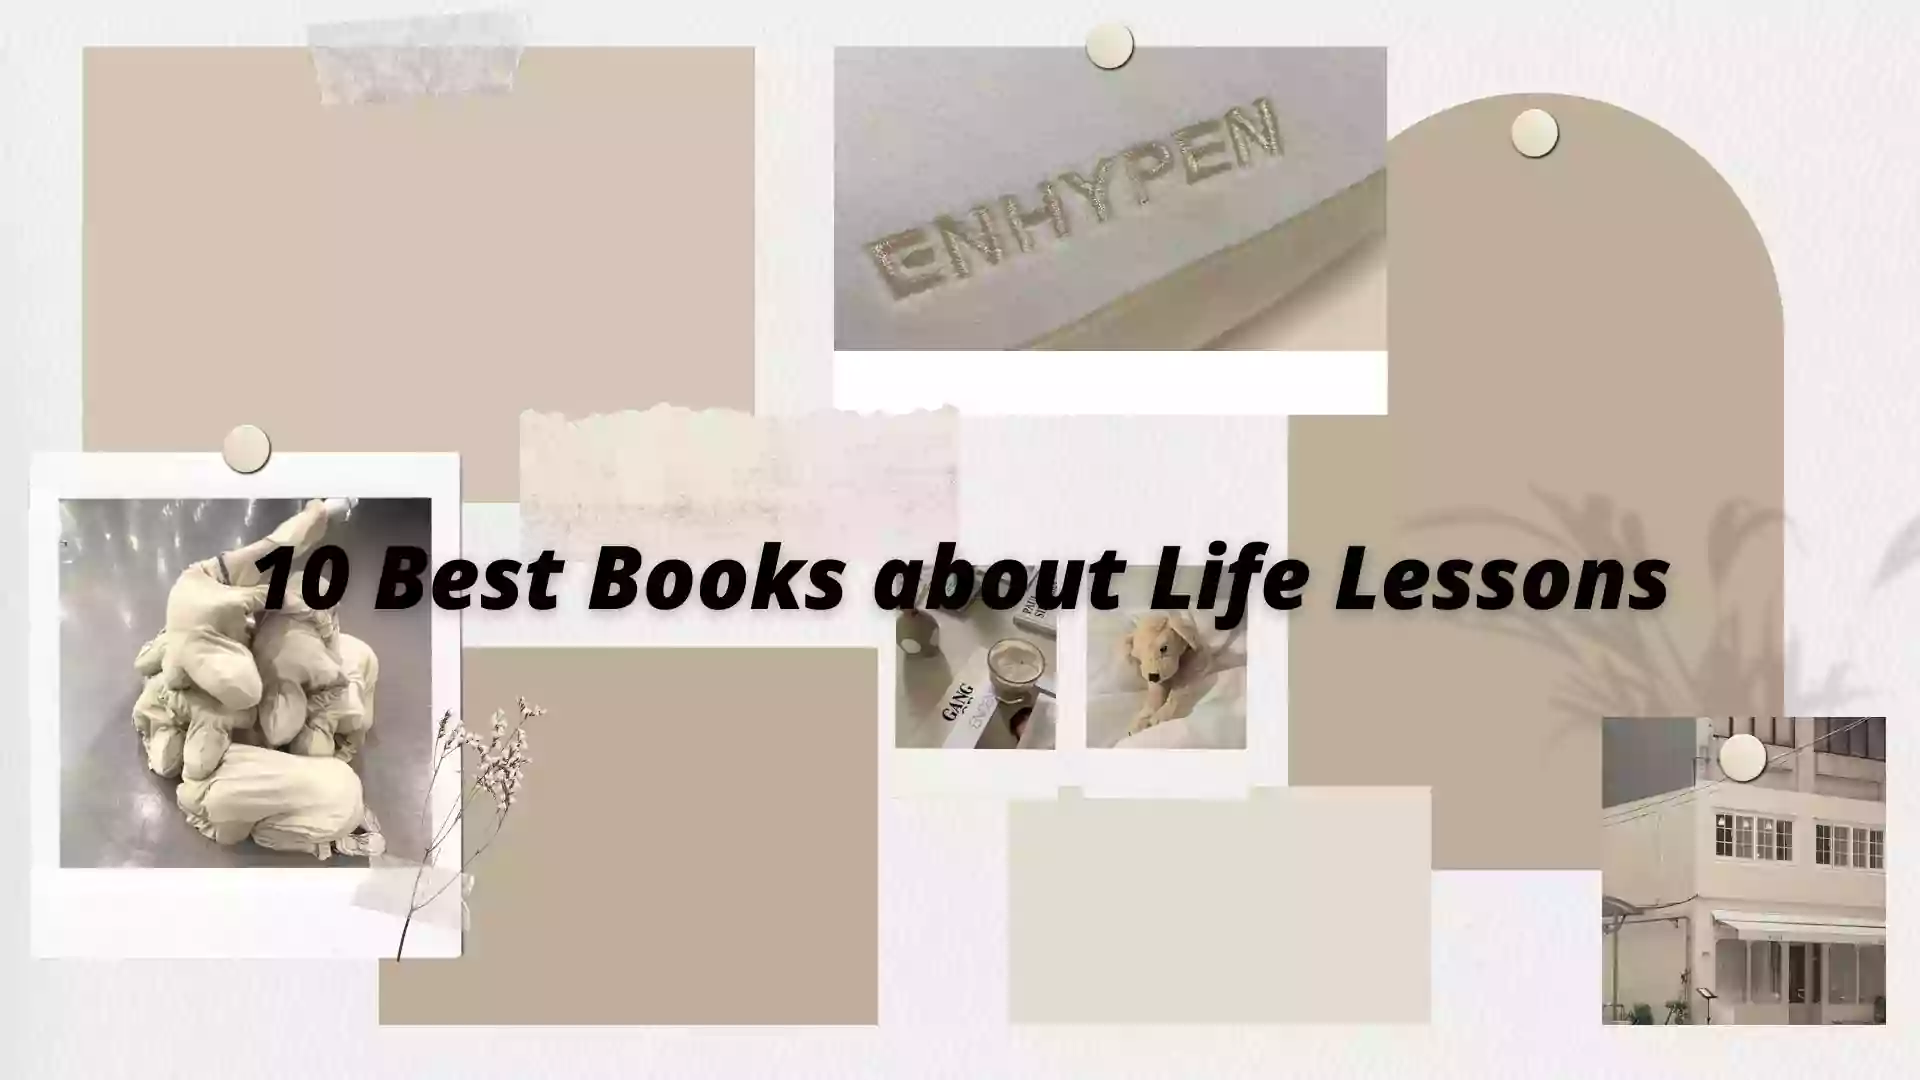 10 Best Books about Life Lessons